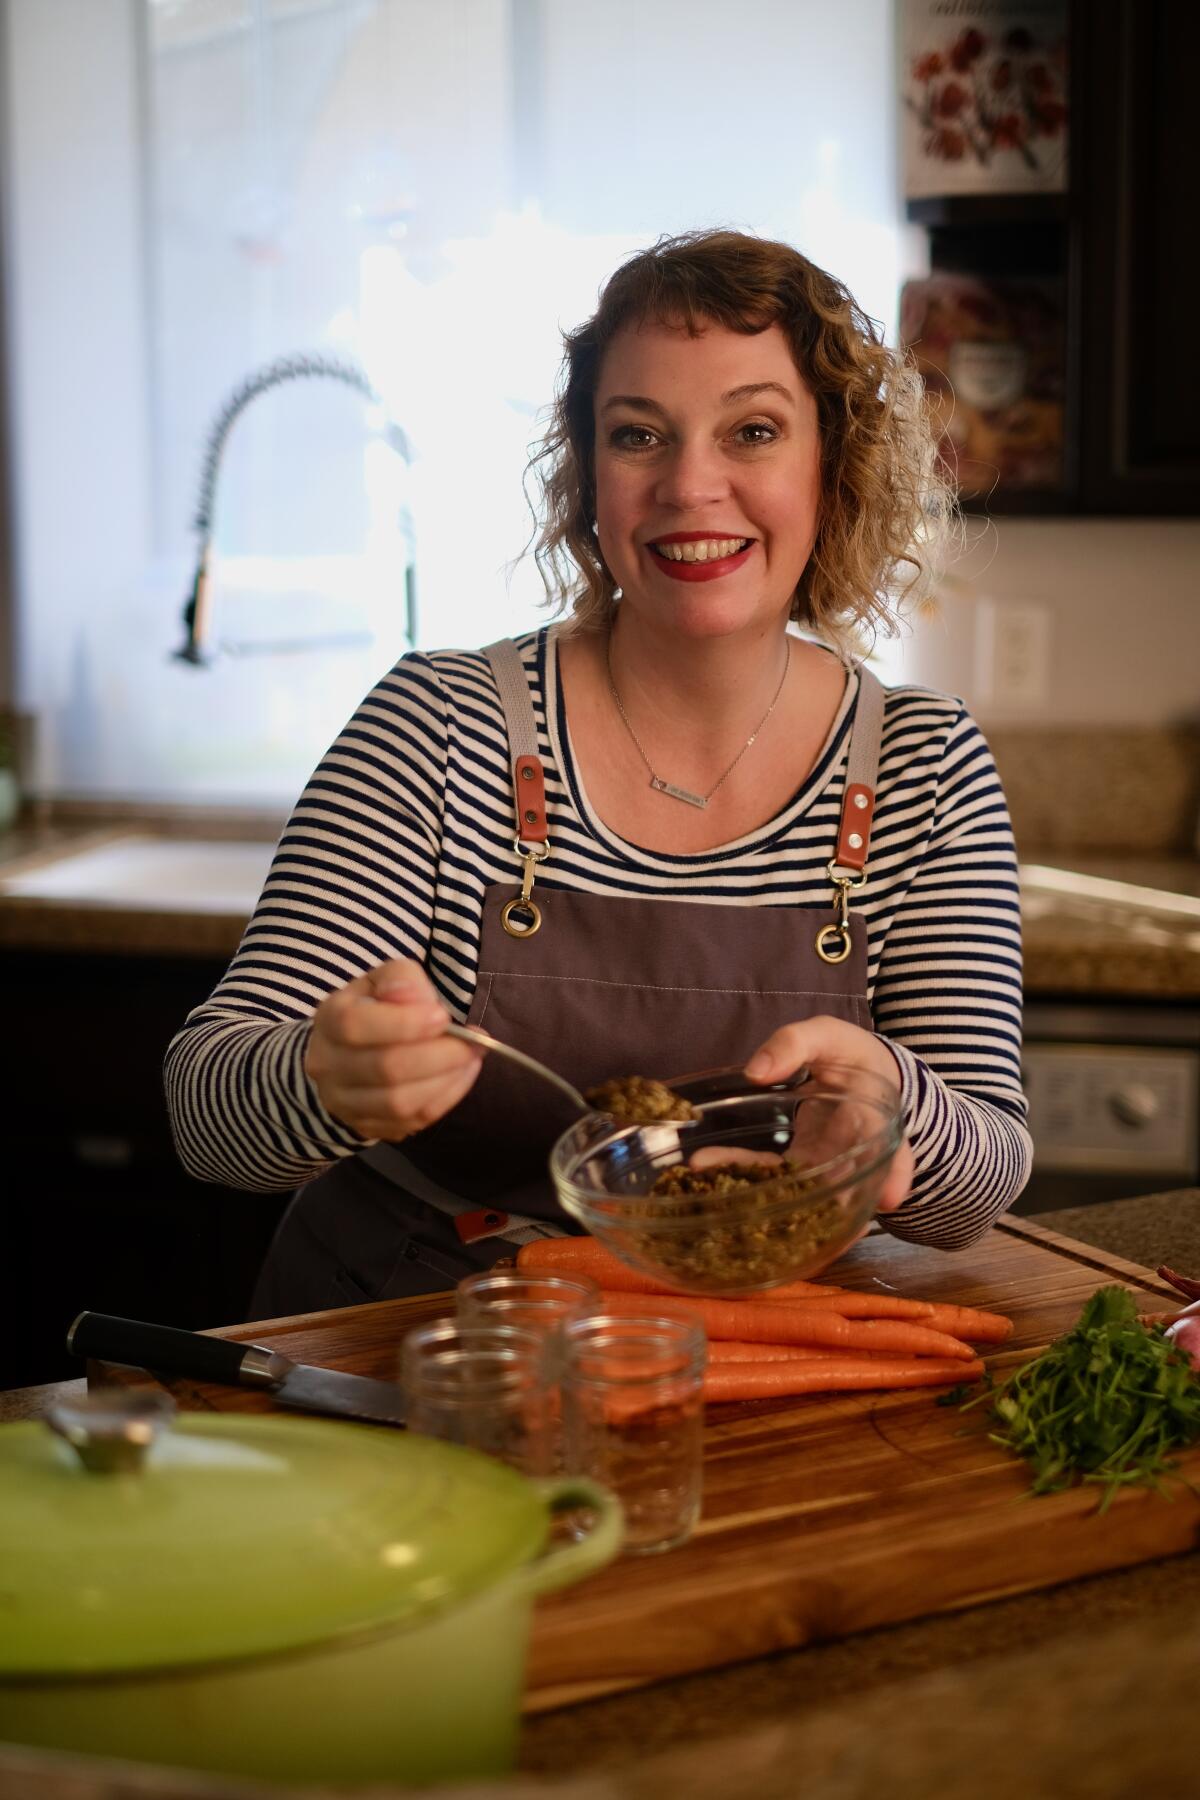 Bon Vivant cooking school offers online cooking classes with chef Tori Sellon.